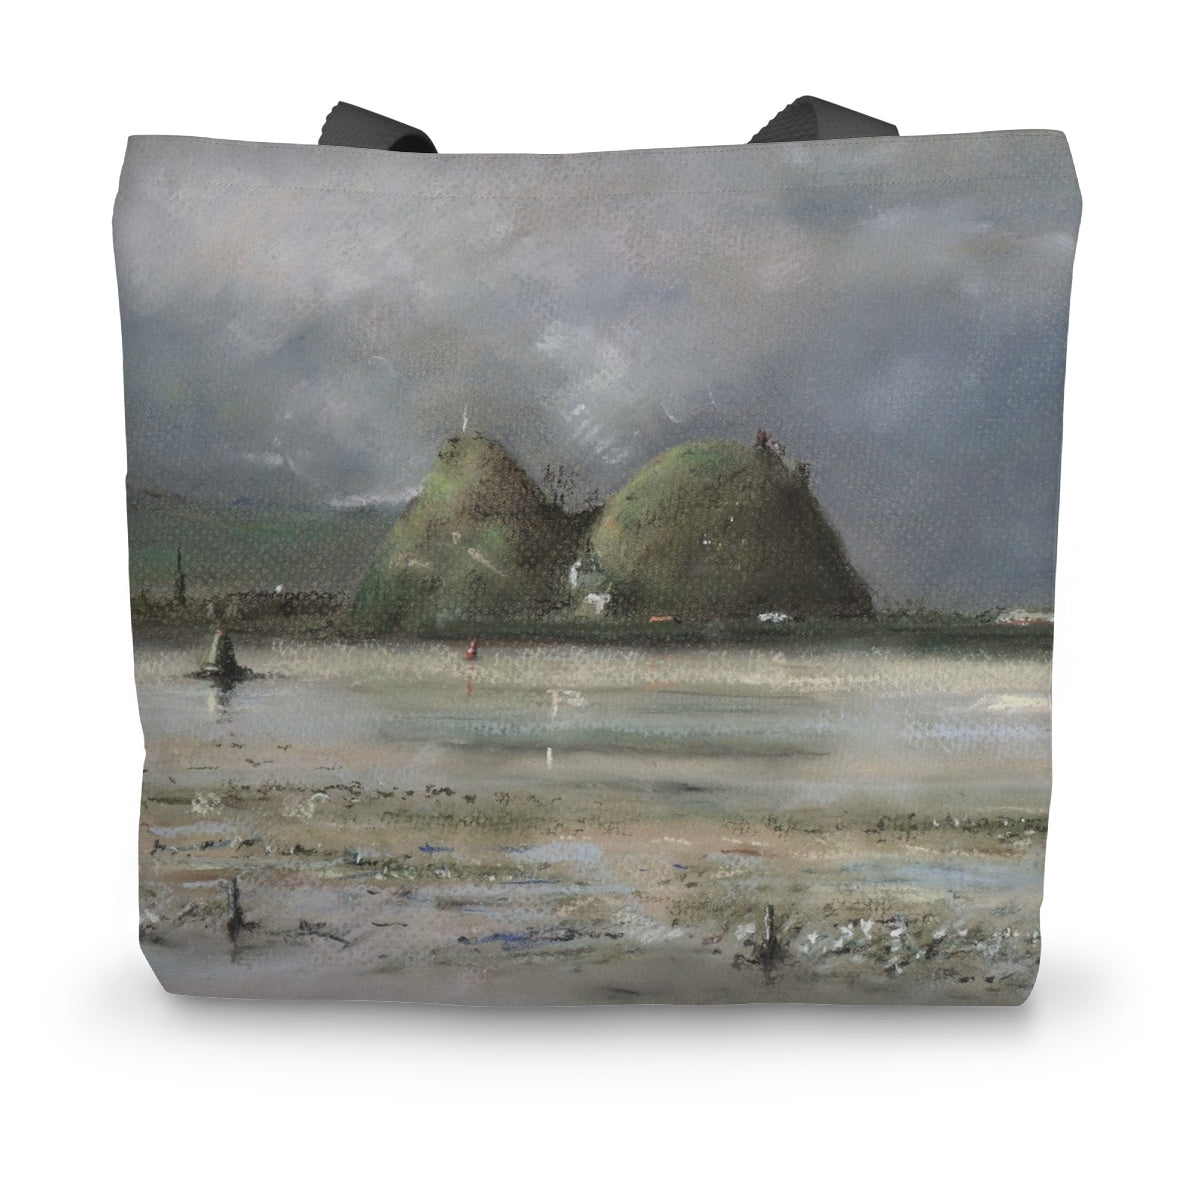 Dumbarton Rock Art Gifts Canvas Tote Bag-Bags-River Clyde Art Gallery-14"x18.5"-Paintings, Prints, Homeware, Art Gifts From Scotland By Scottish Artist Kevin Hunter